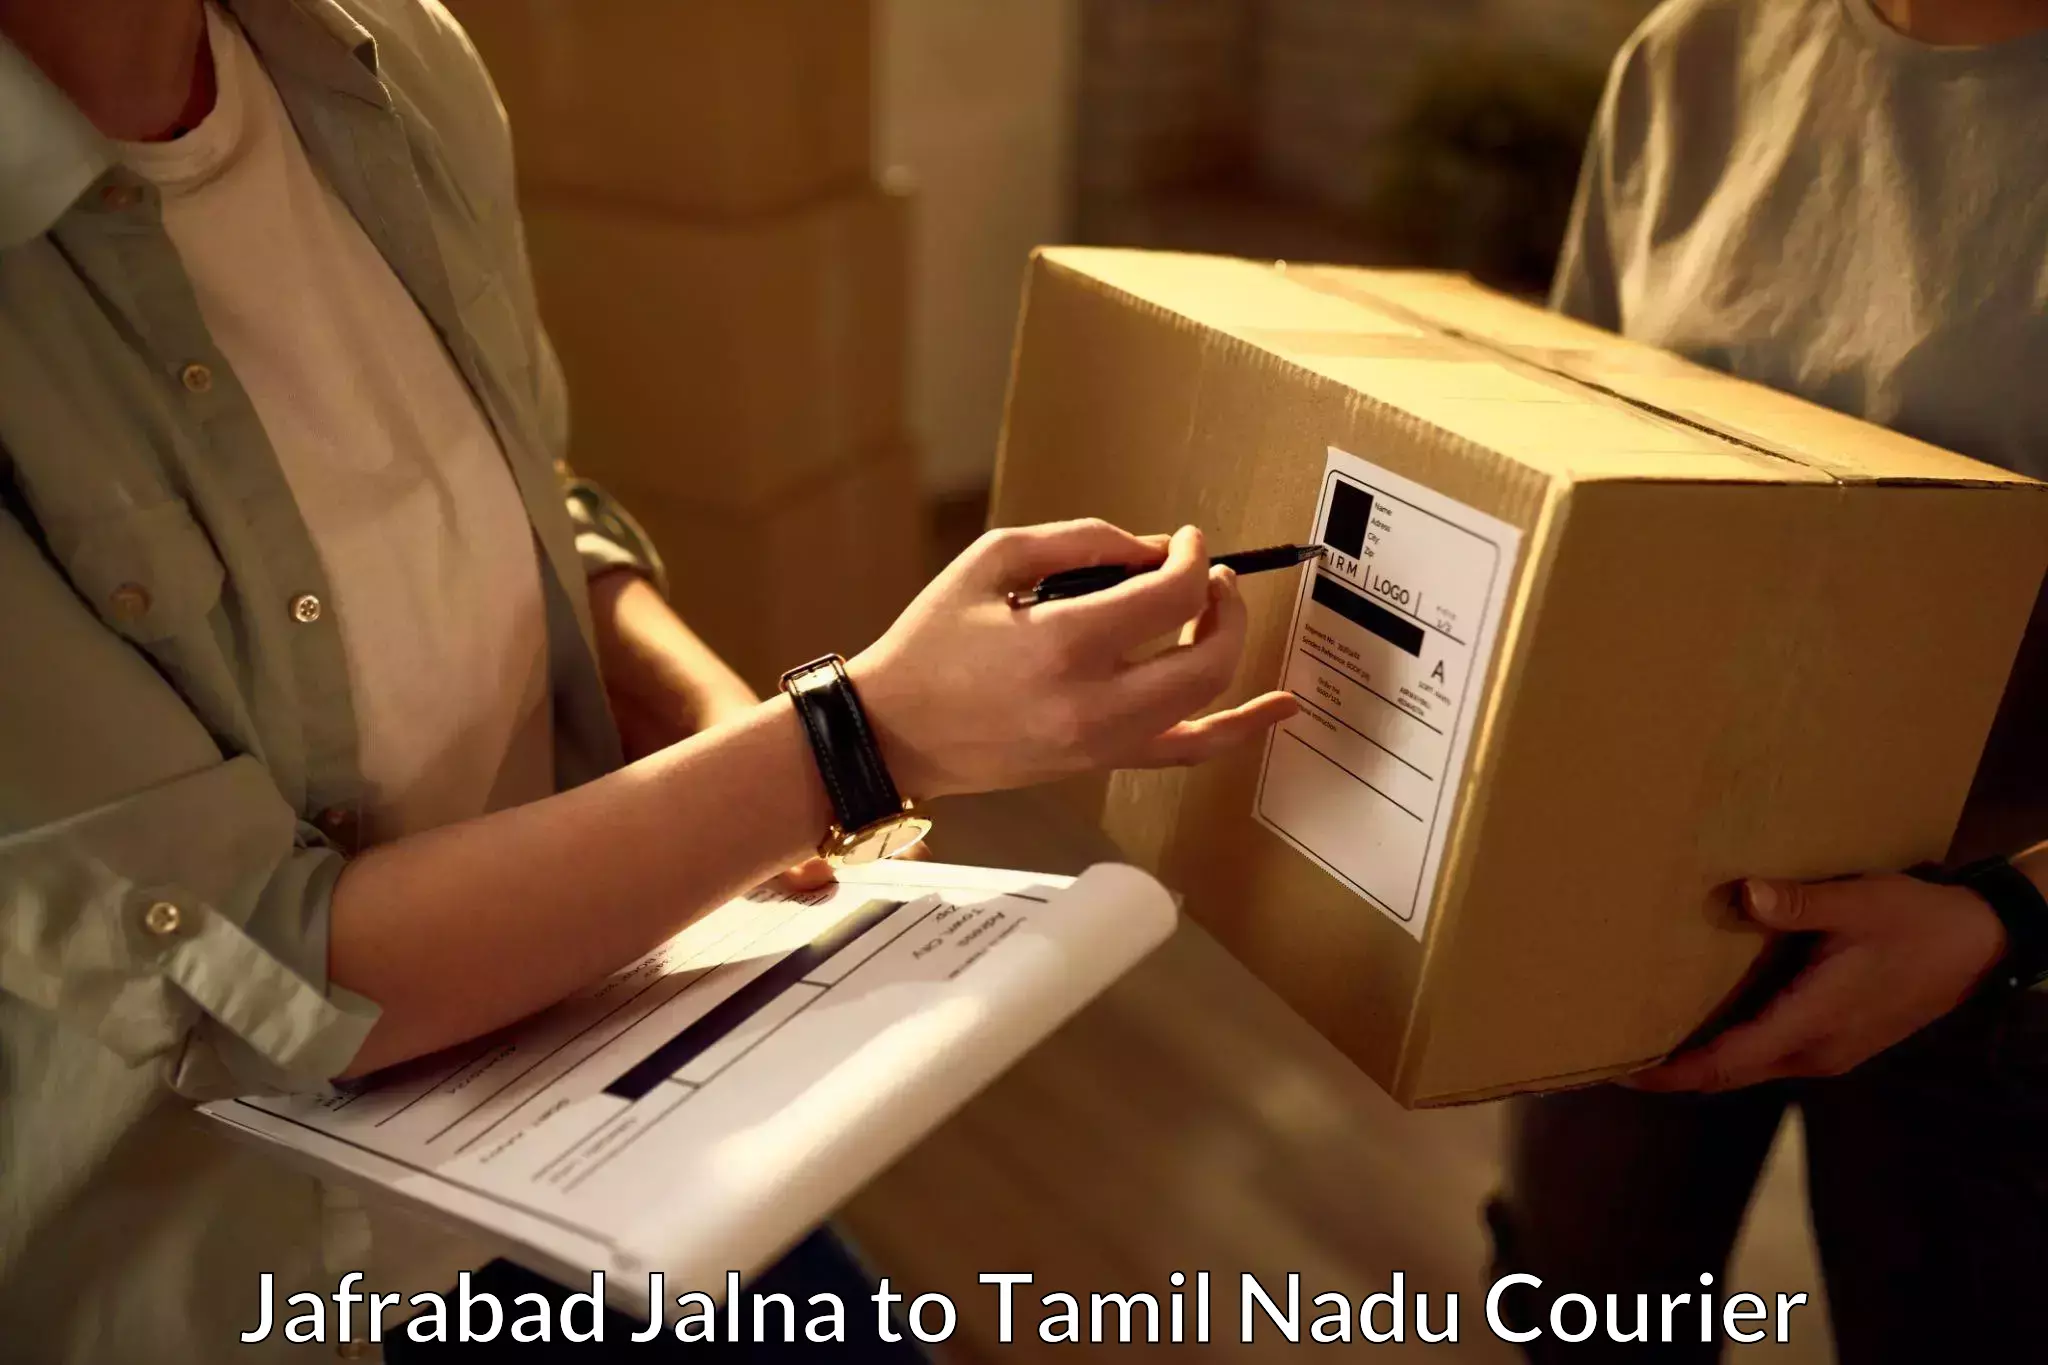 Quality courier services Jafrabad Jalna to Periyakulam